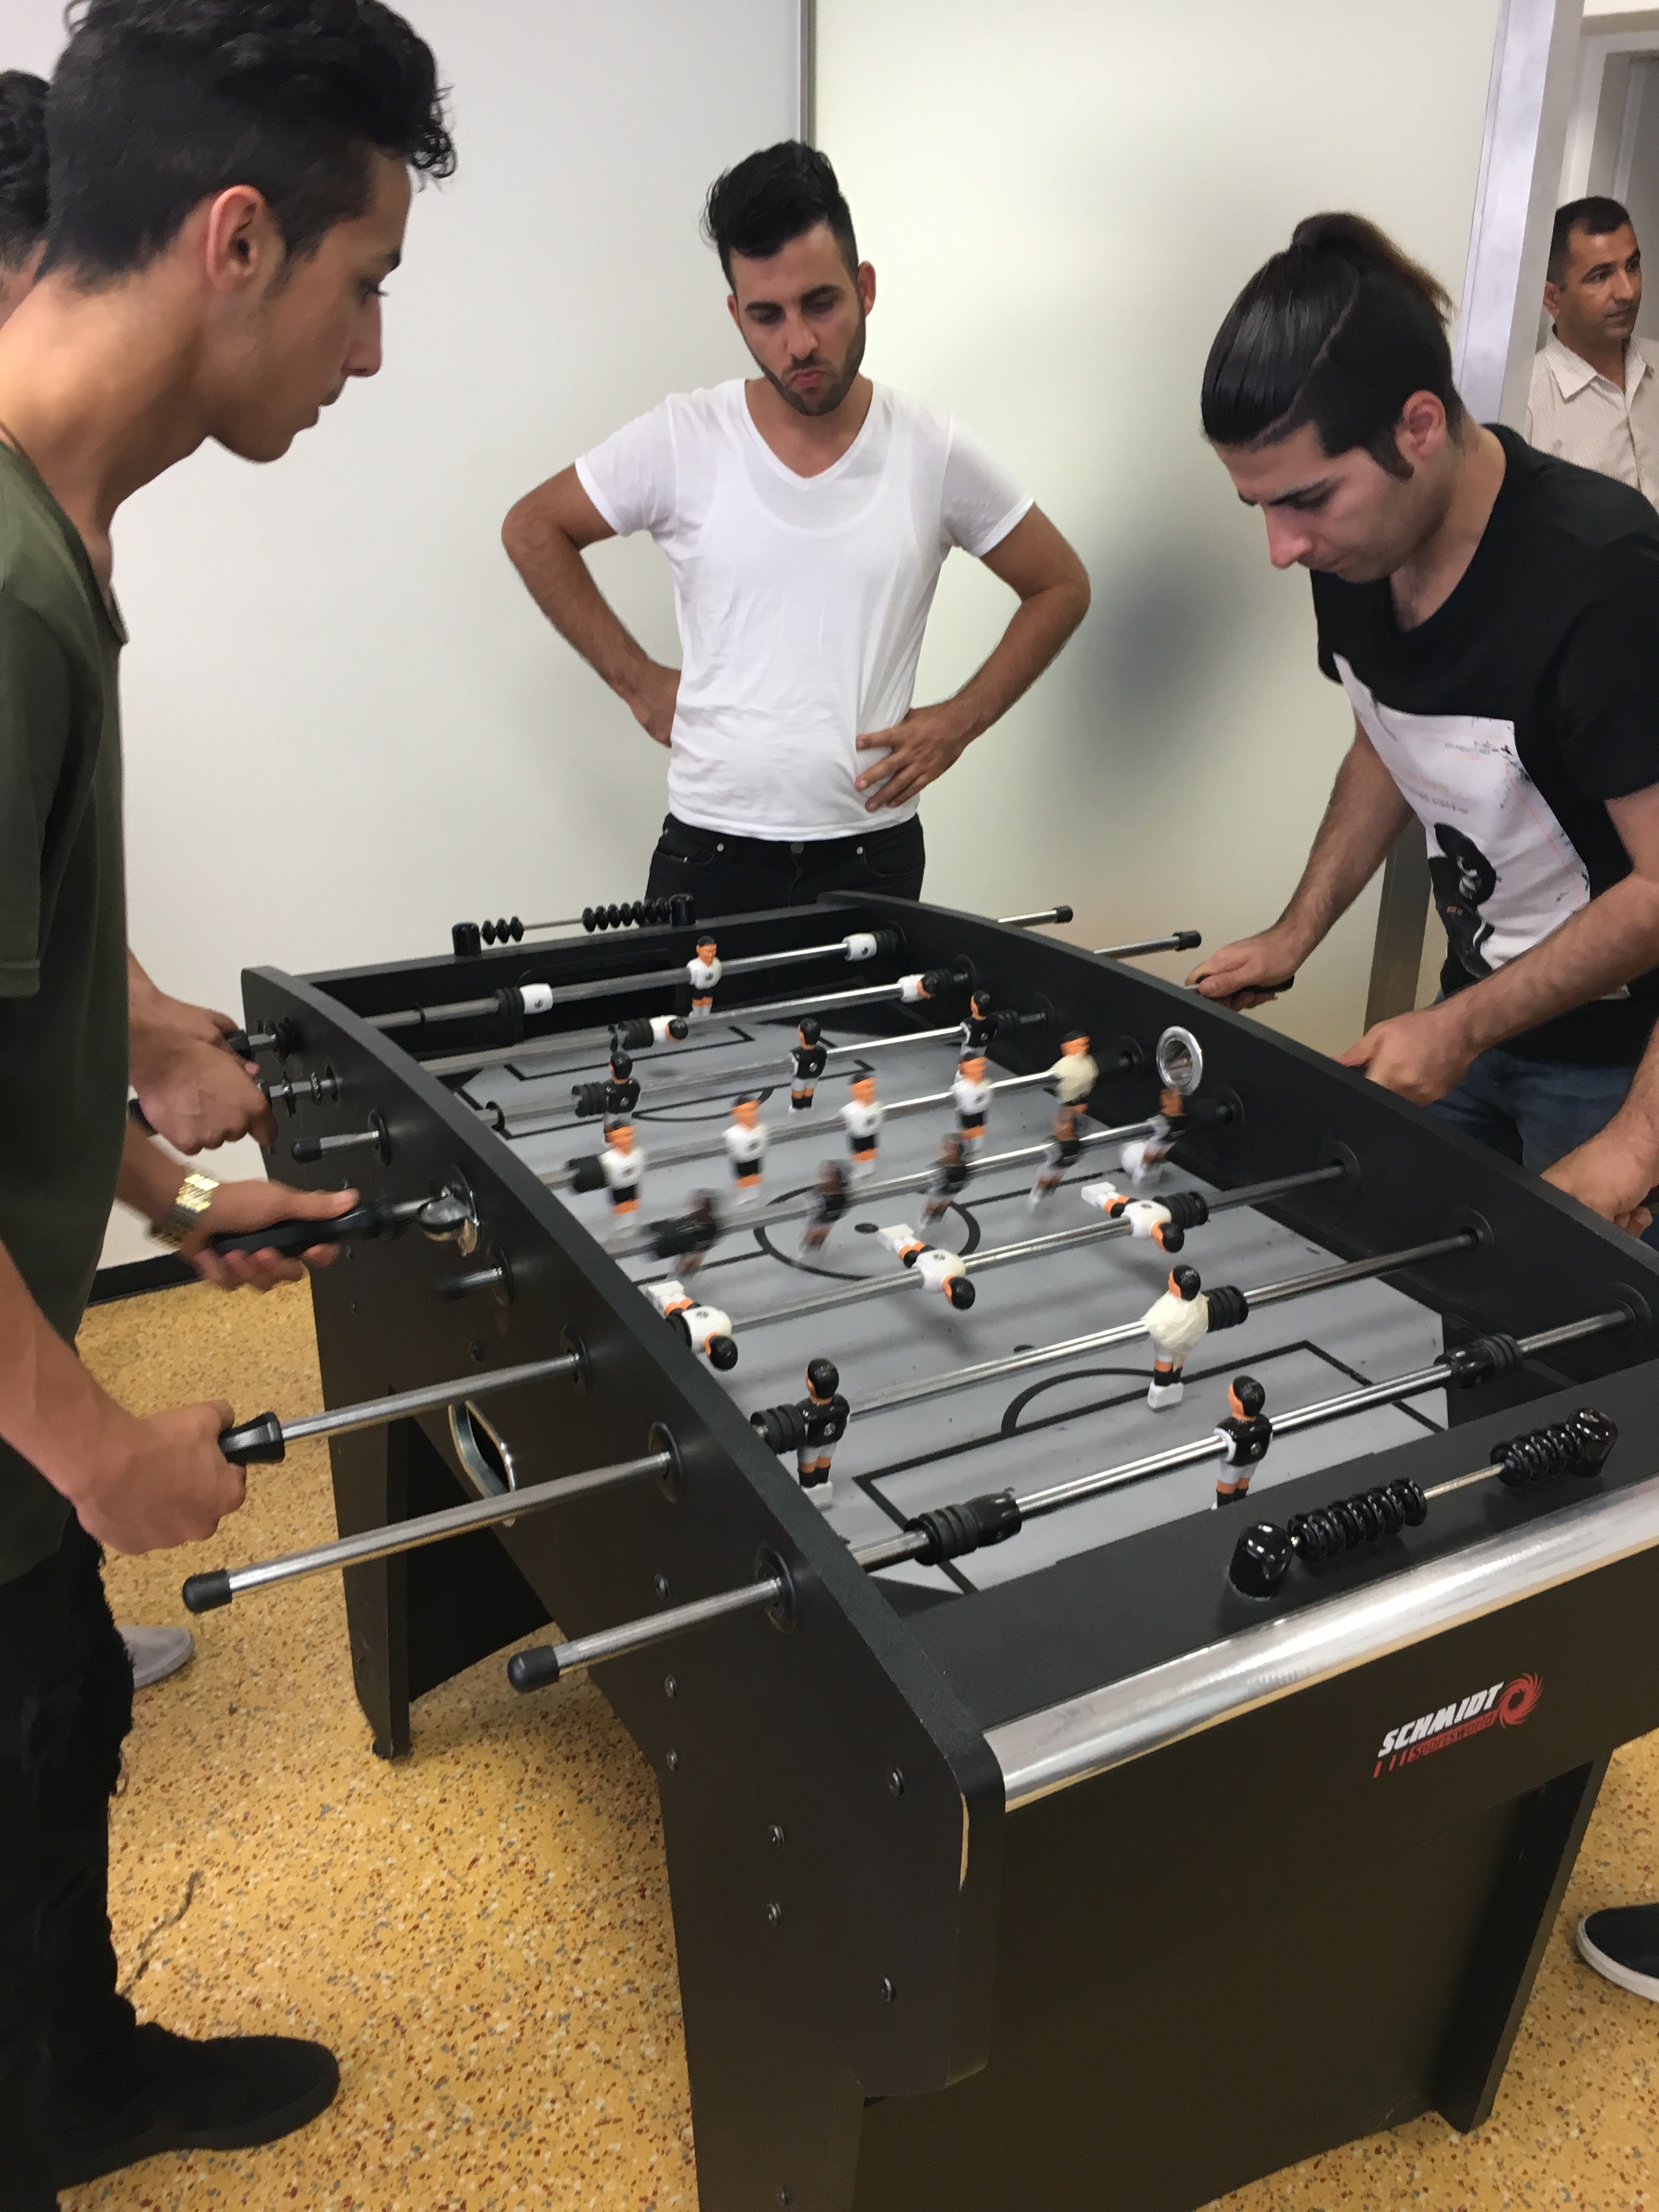 People playing foosball at The Meeting Place